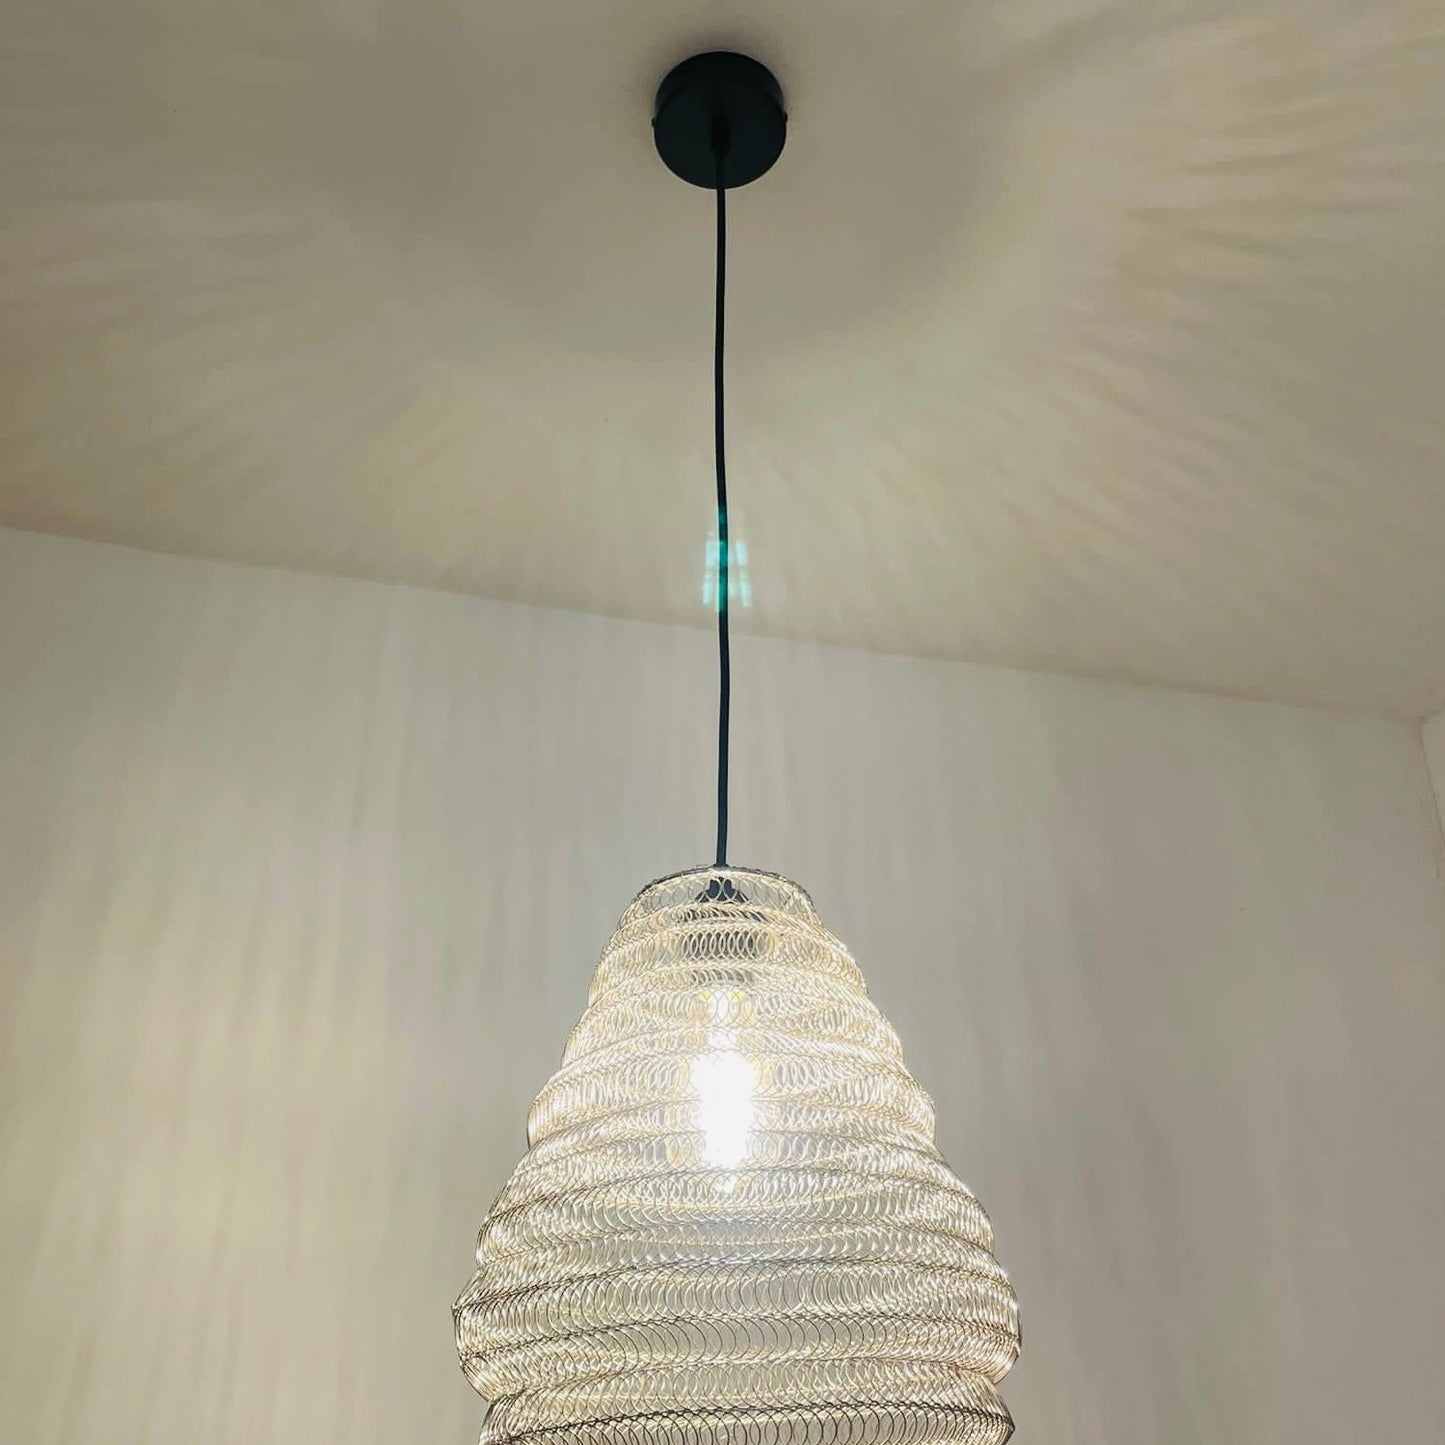 Bring a Moroccan twist to your home décor with the delicately crafted Casablanca ceiling light. Made in an intricate design from silver metal wire this large statement light would look fabulous in both living and dining spaces, as well as bedrooms. When switched on the light shines through the shade creating a spectacular pattern on the ceiling and walls.